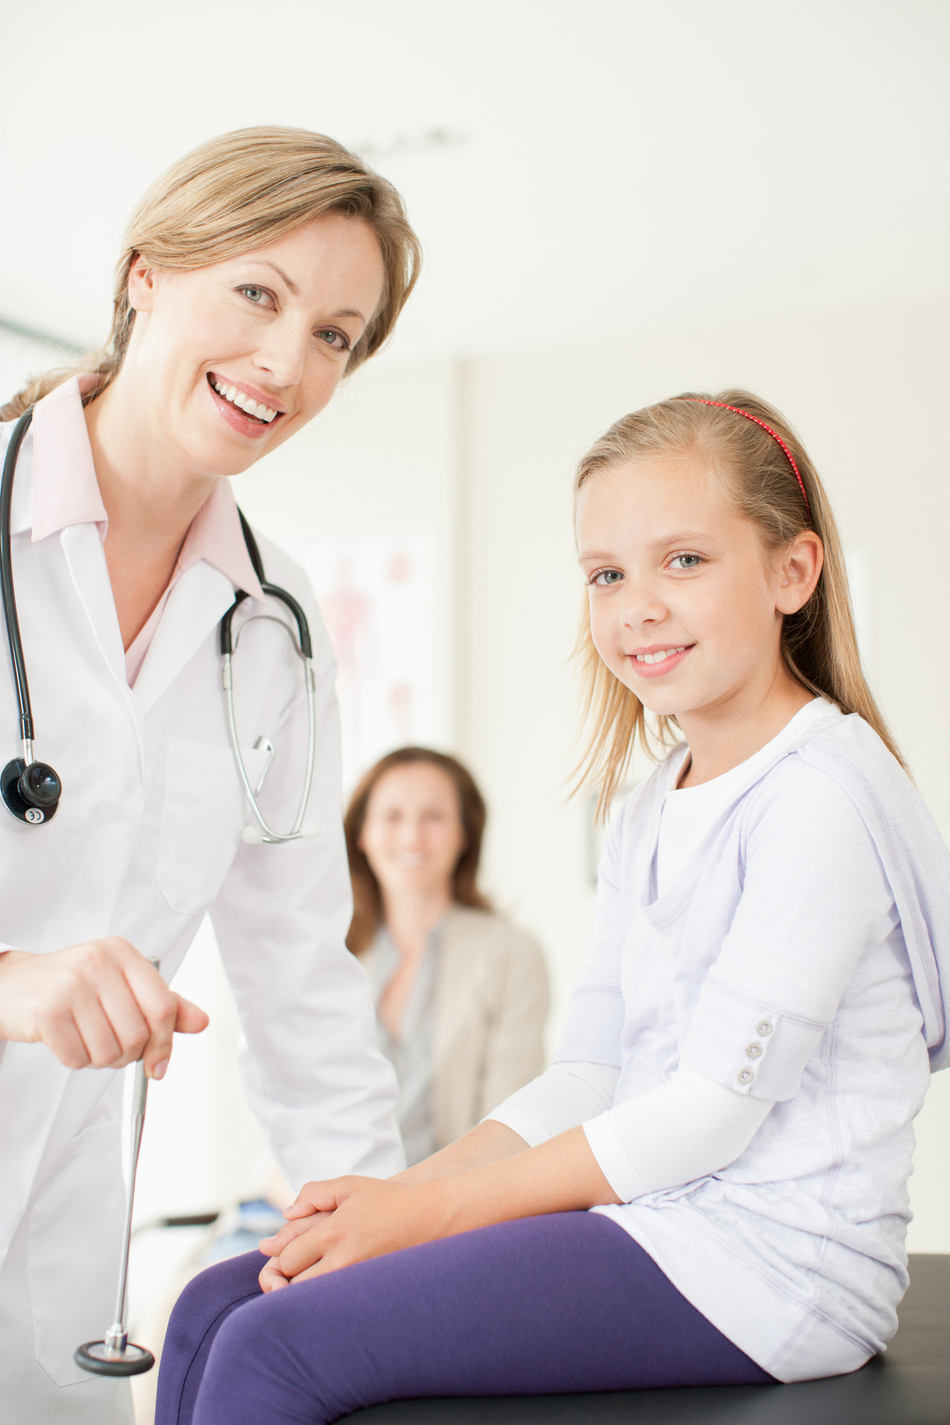 Is a Career in Family Medicine Right for You?